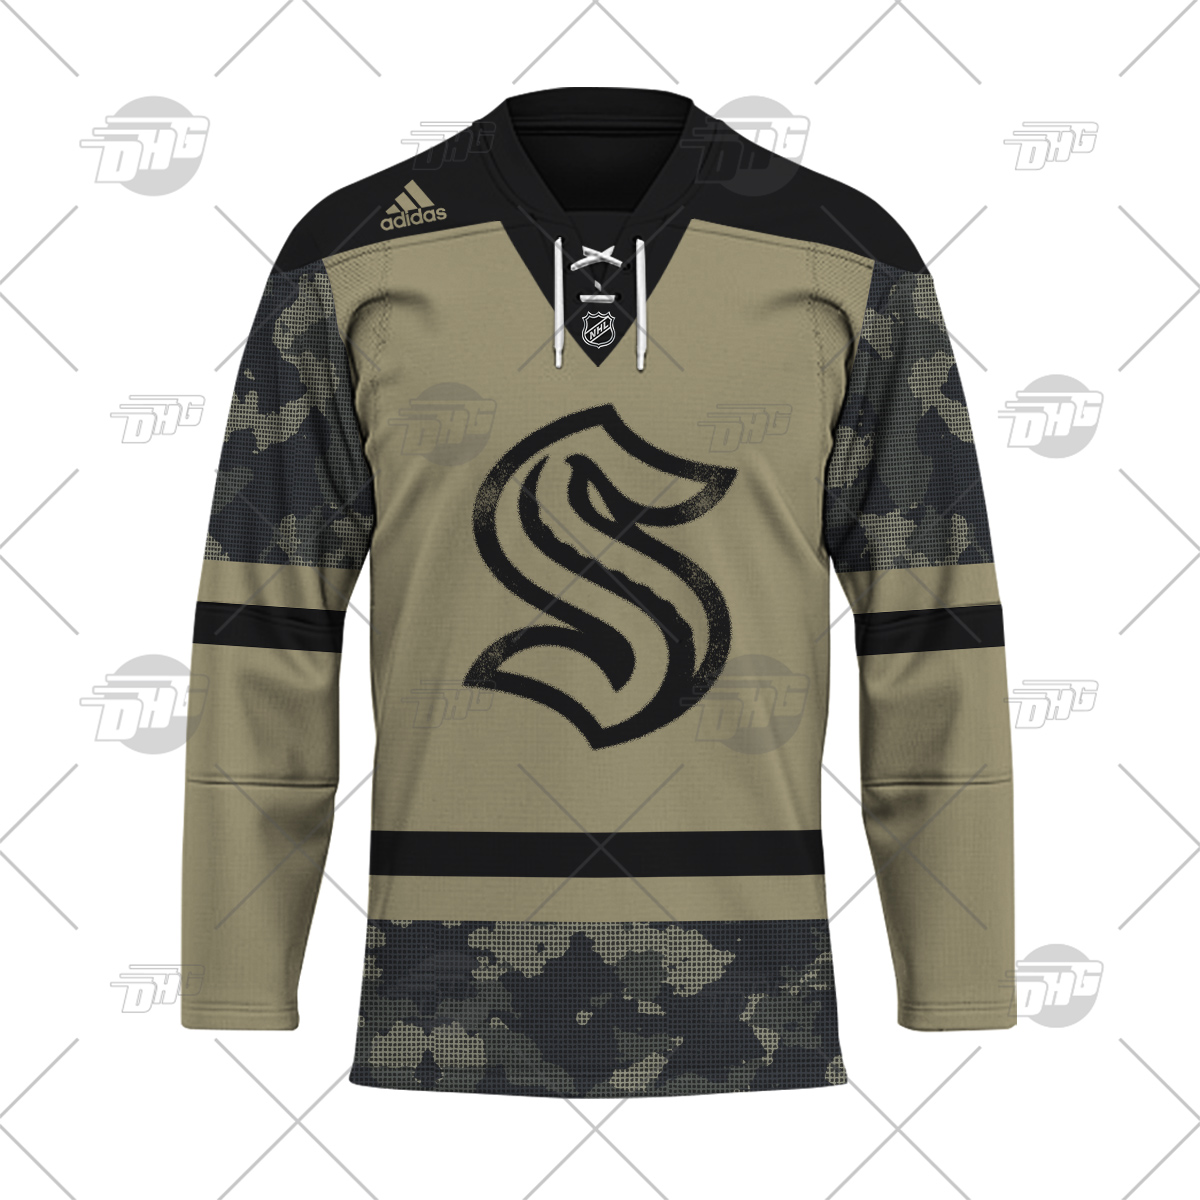 Adidas Authentic Military Appreciation NHL Practice Jersey - Pittsburgh  Penguins - Adult